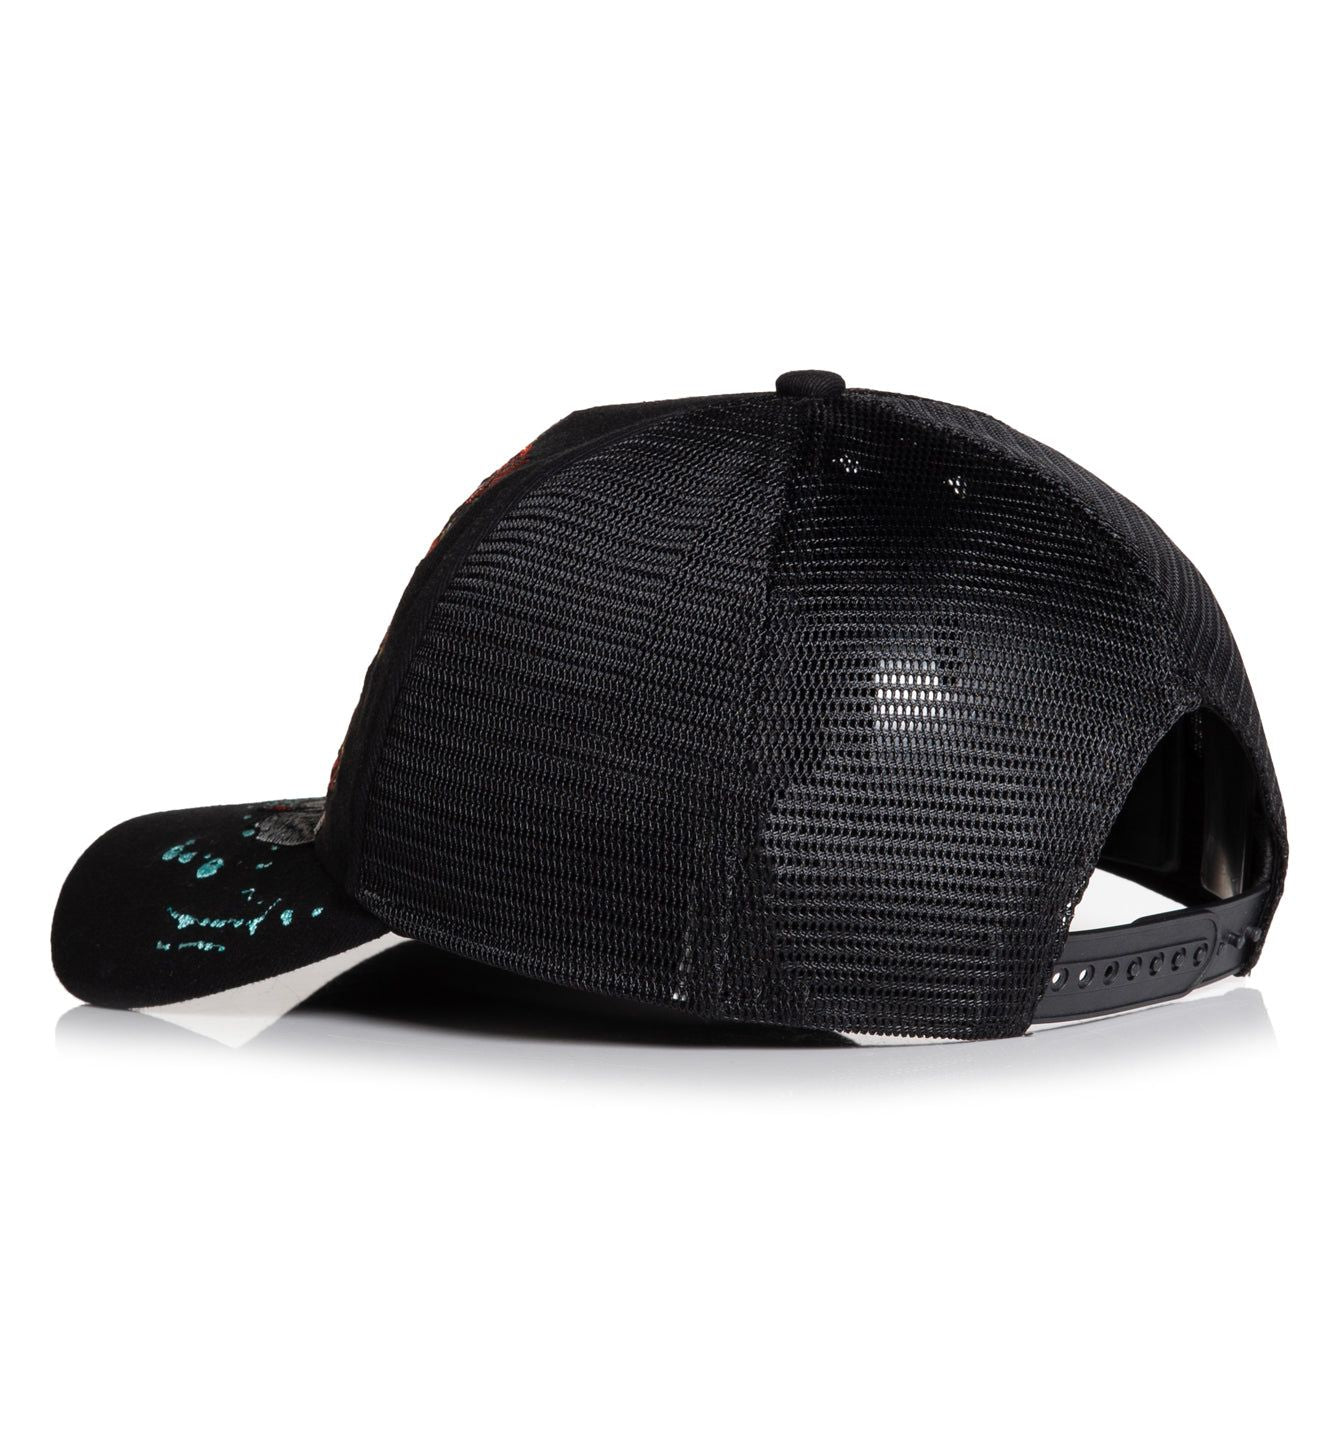 Alley Wreck Hat - Affliction Clothing